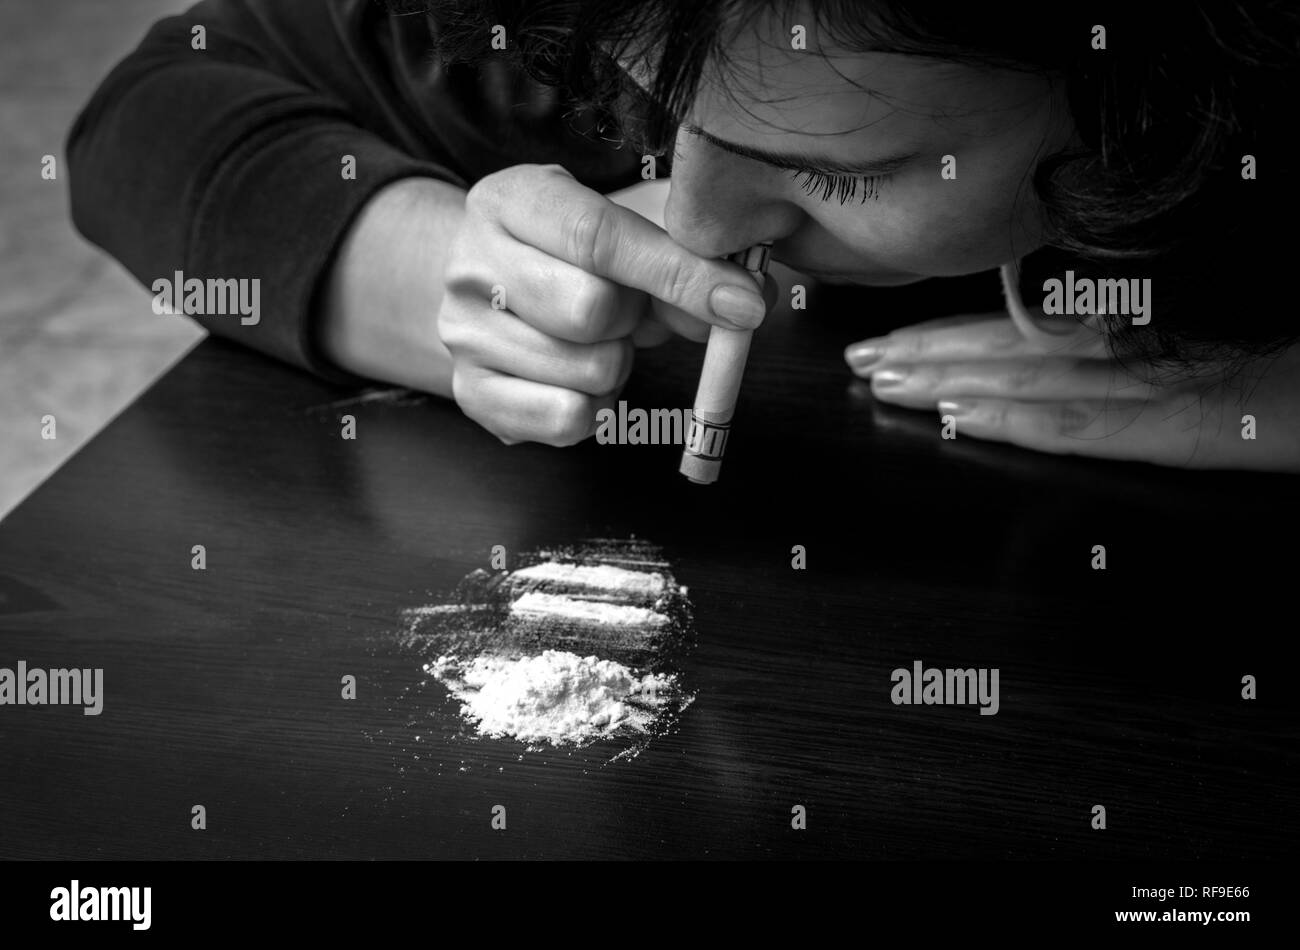 Cocain Black and White Stock Photos & Images - Alamy